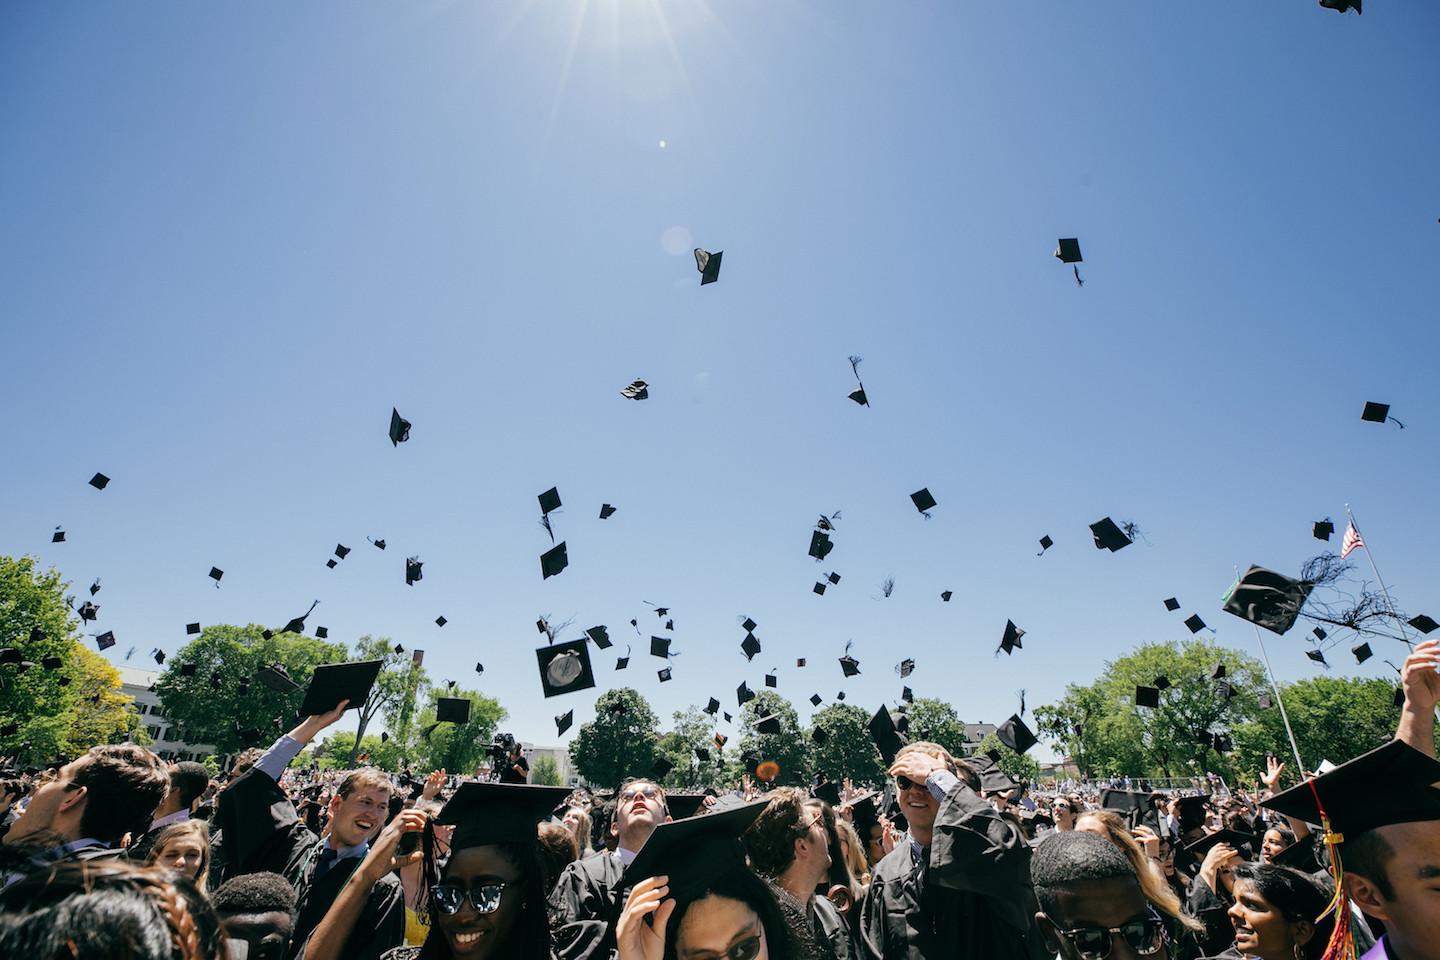 Caps thrown in the air at graduation